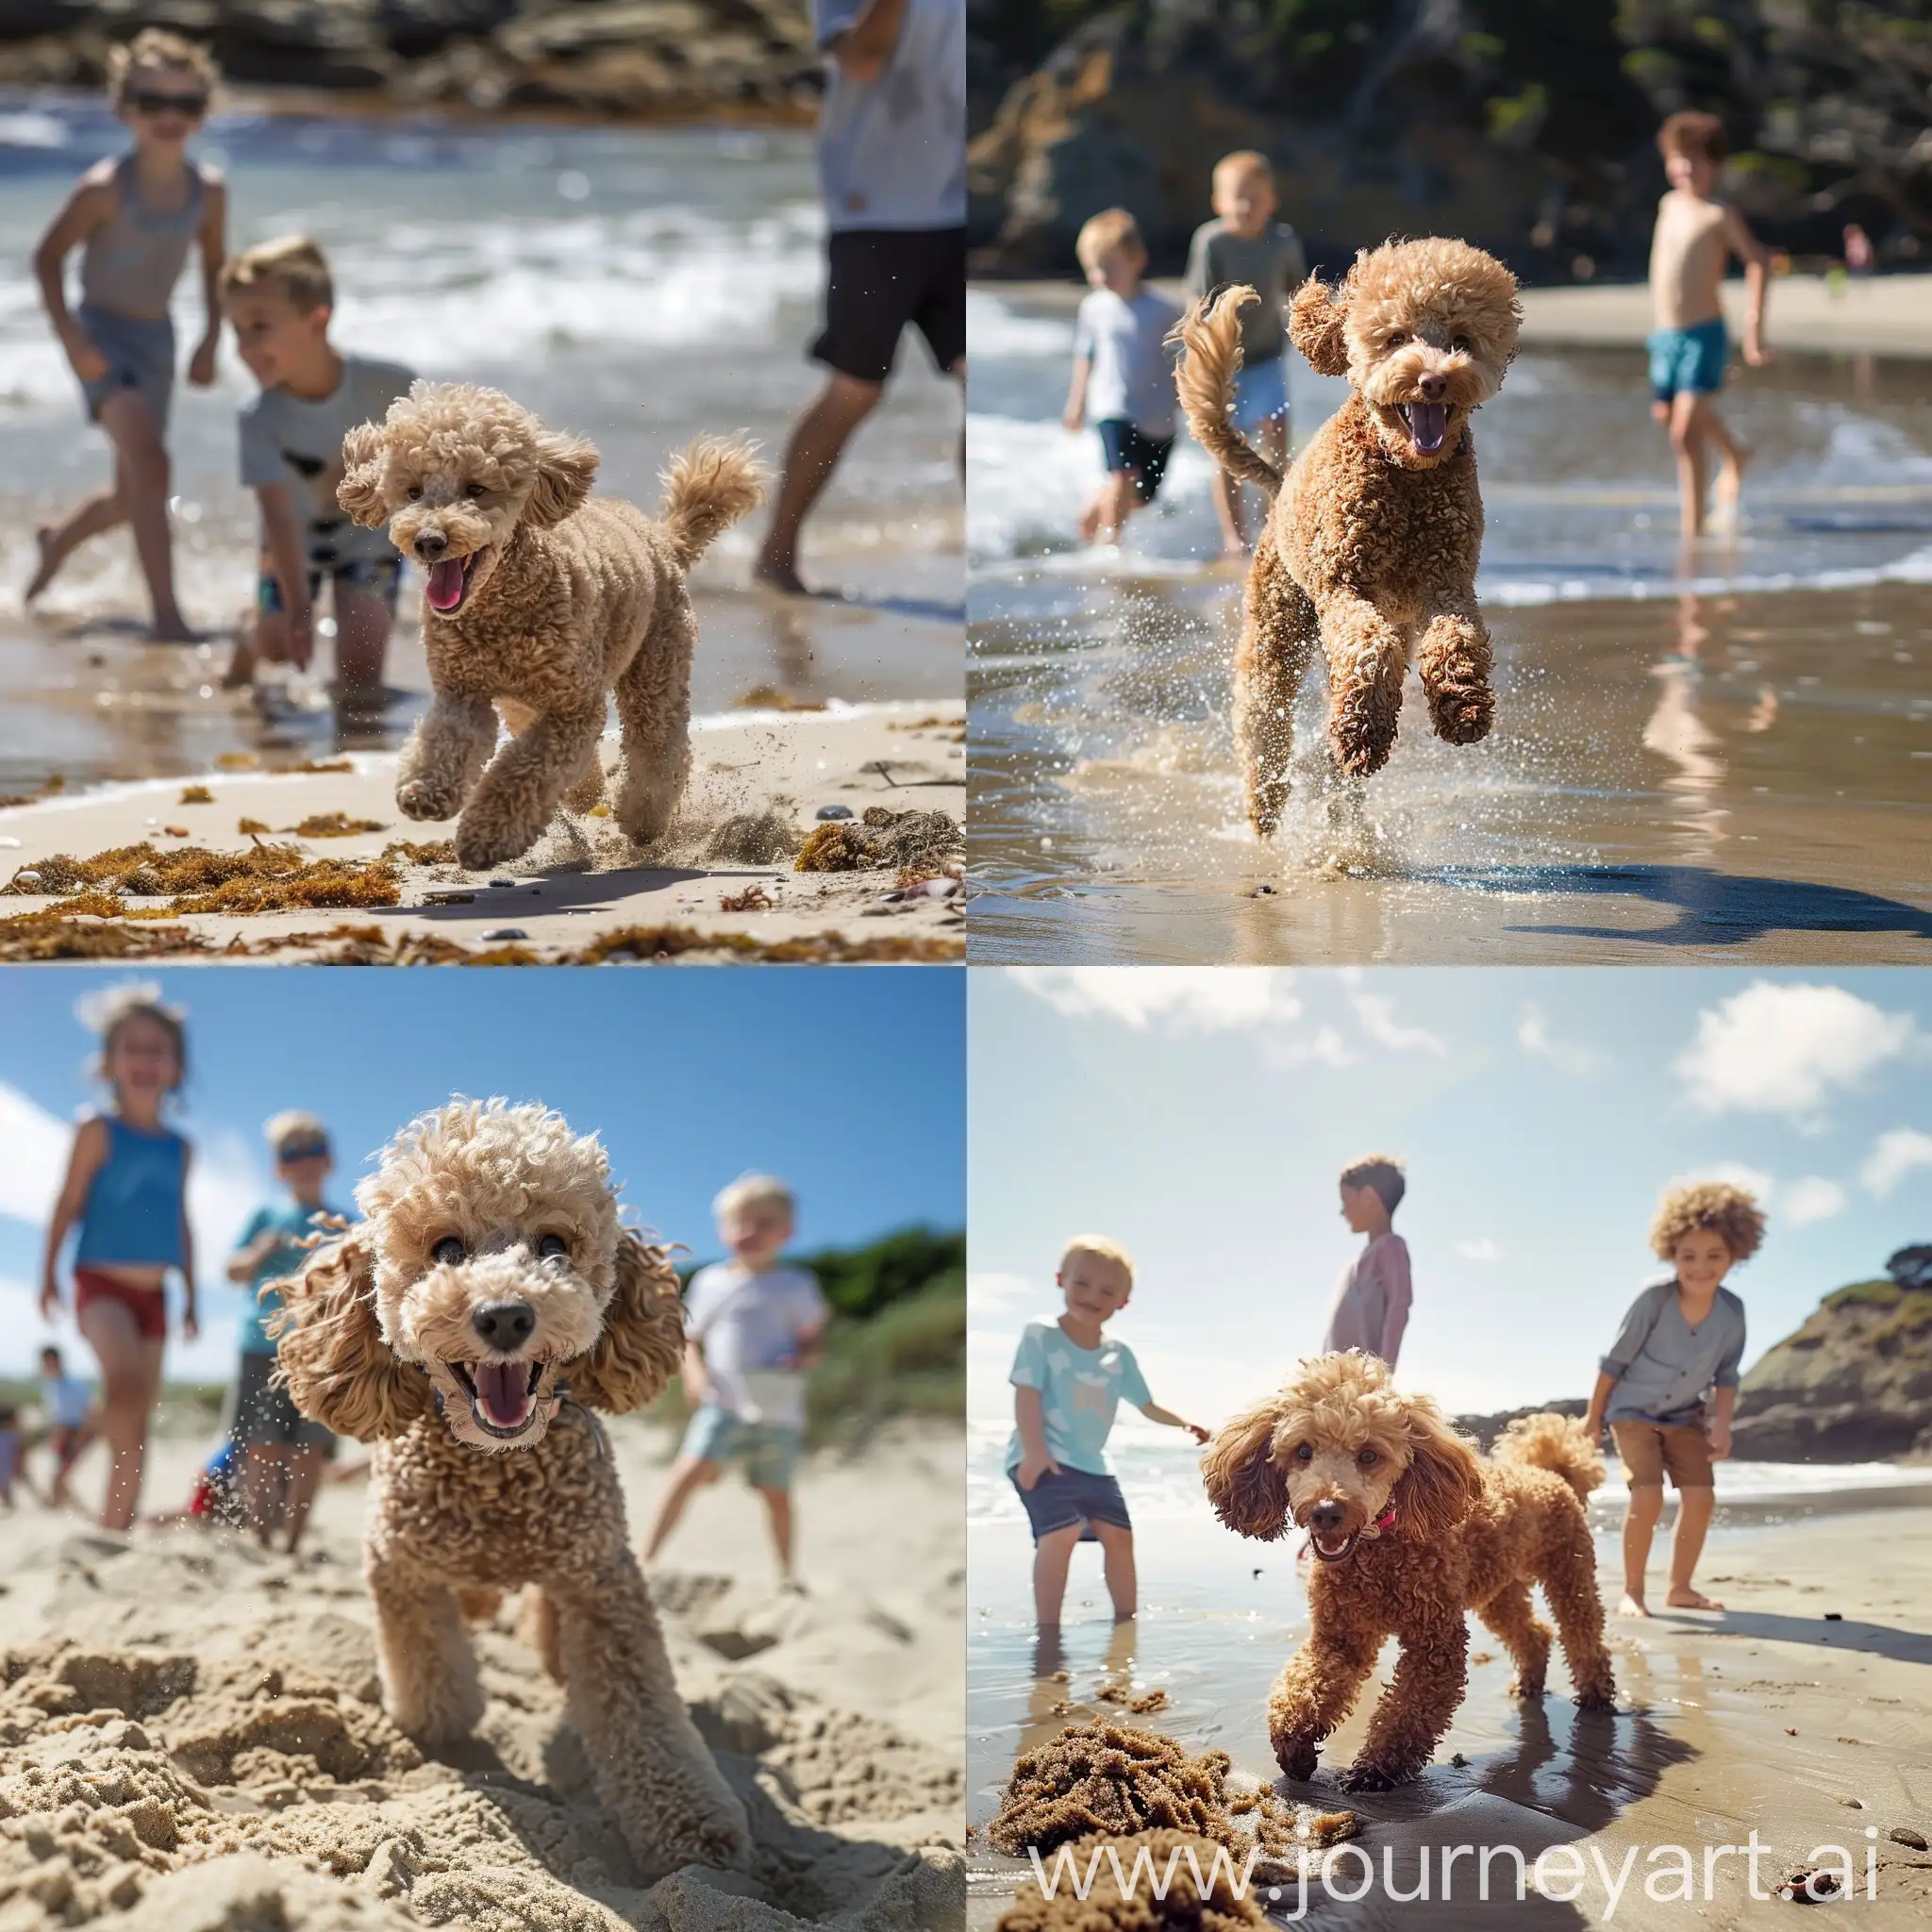 Joyful-Poodle-Playing-with-Children-on-the-Beach